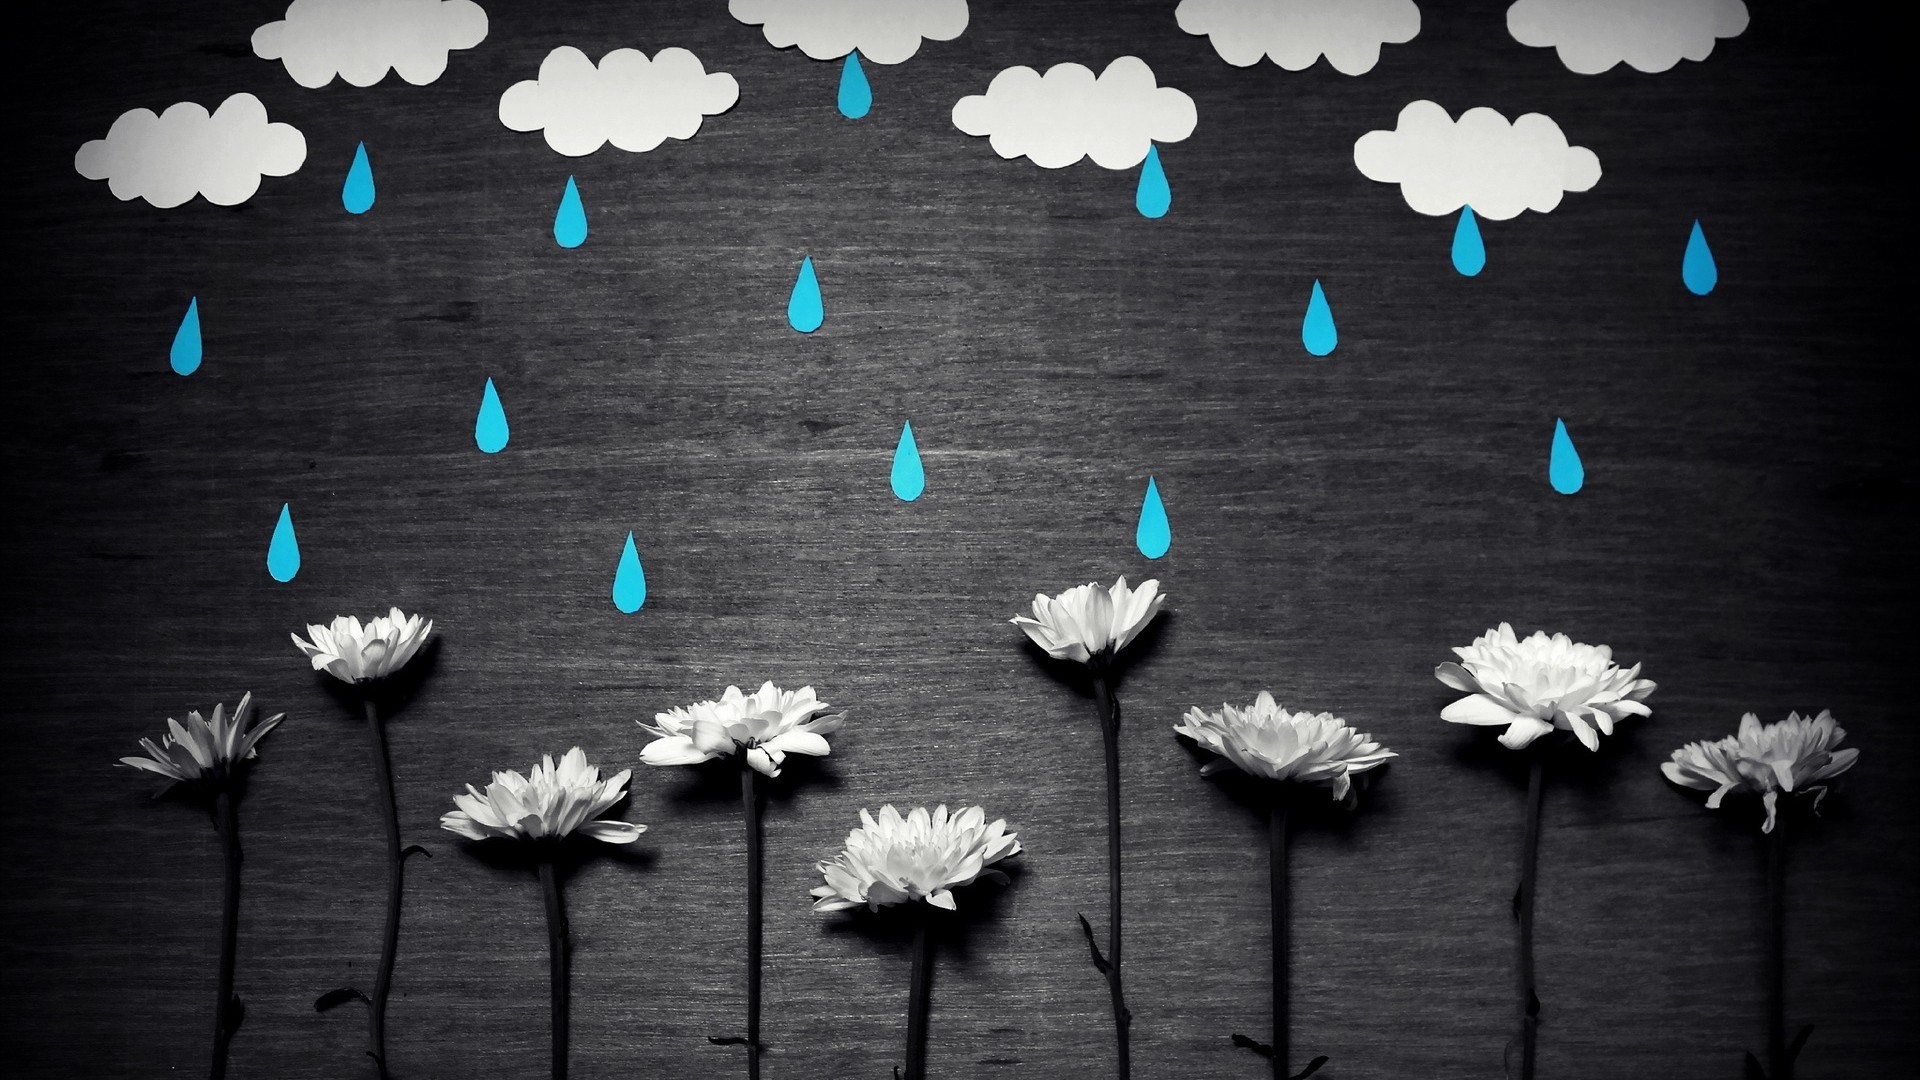 minimalism, Simple, Simple background, Flowers, Clouds, Rain, Water drops, Paper, Selective coloring, Handicraft Wallpaper HD / Desktop and Mobile Background